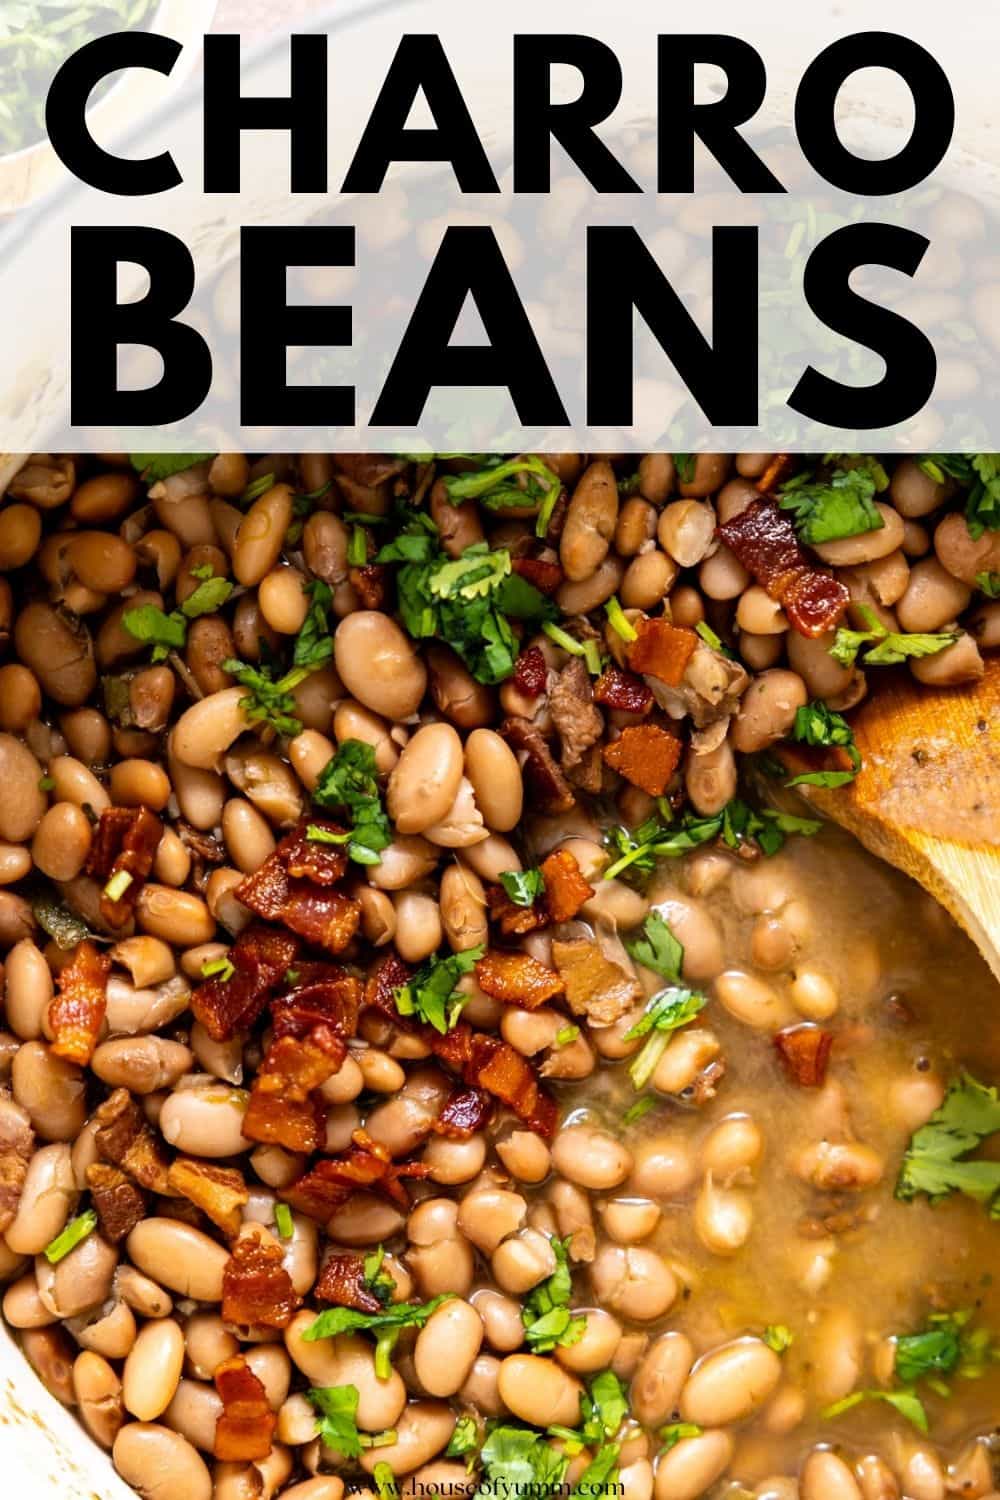 Charro beans with text.